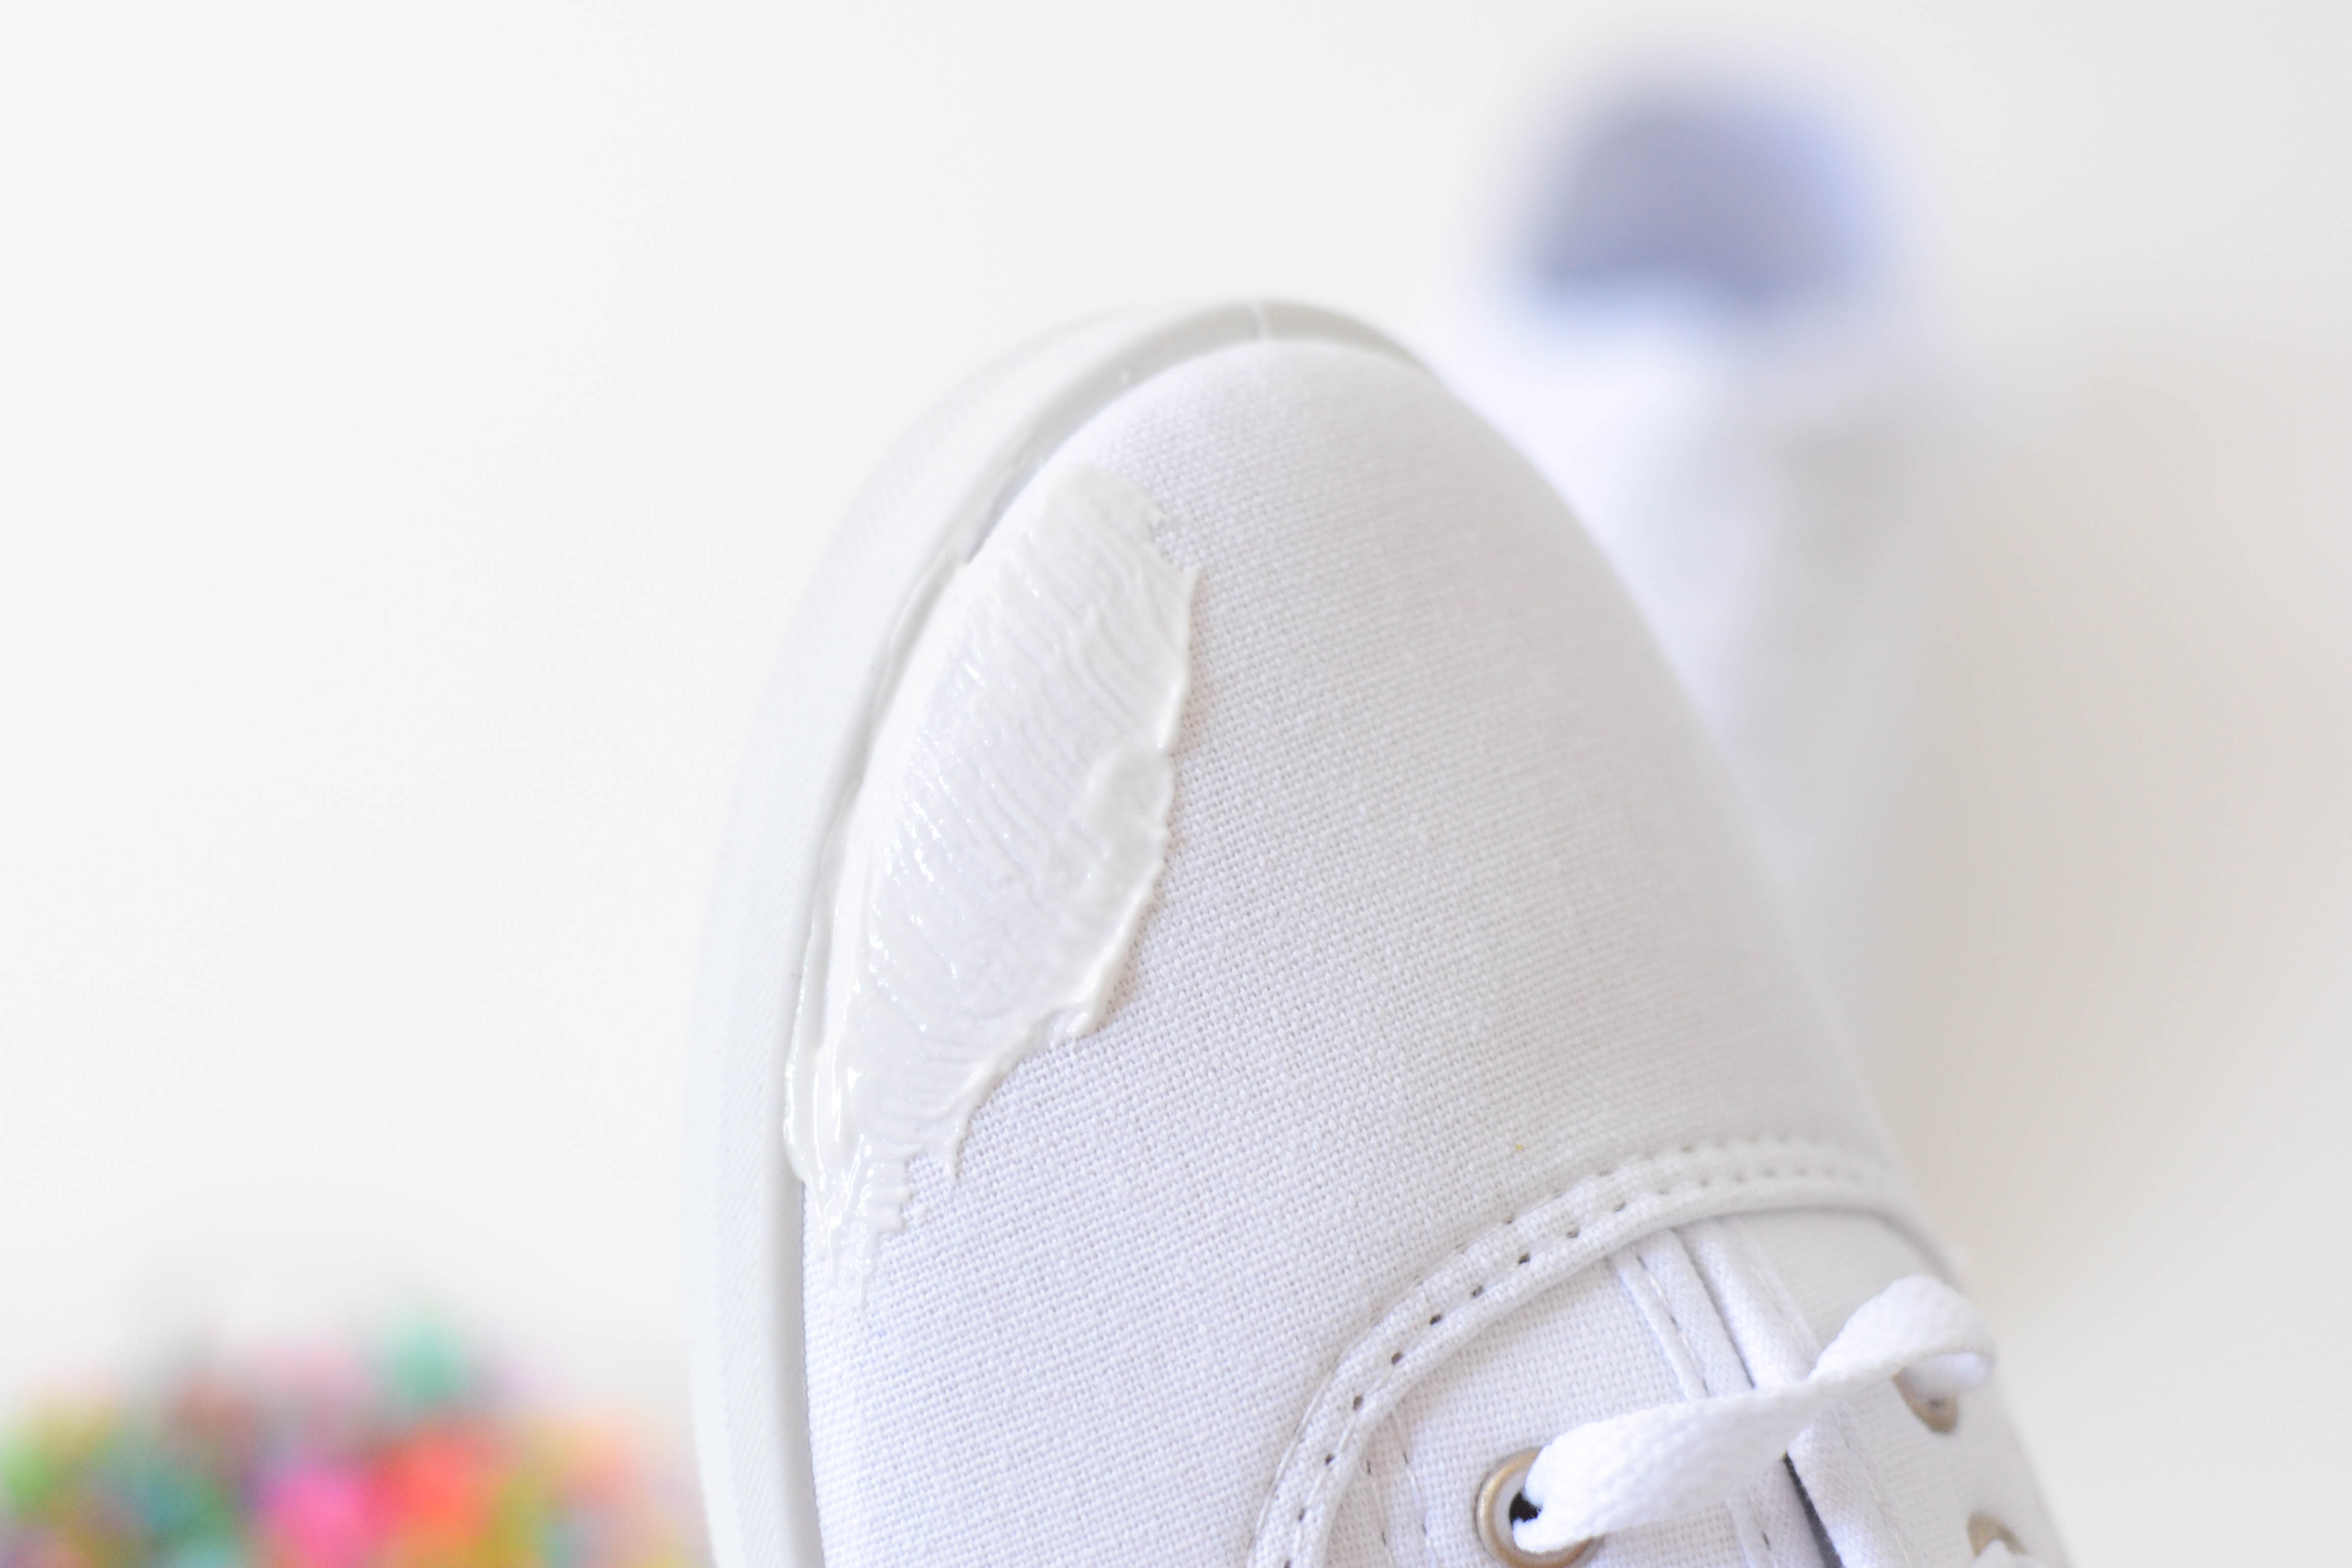 DIY Confetti Dipped Shoes